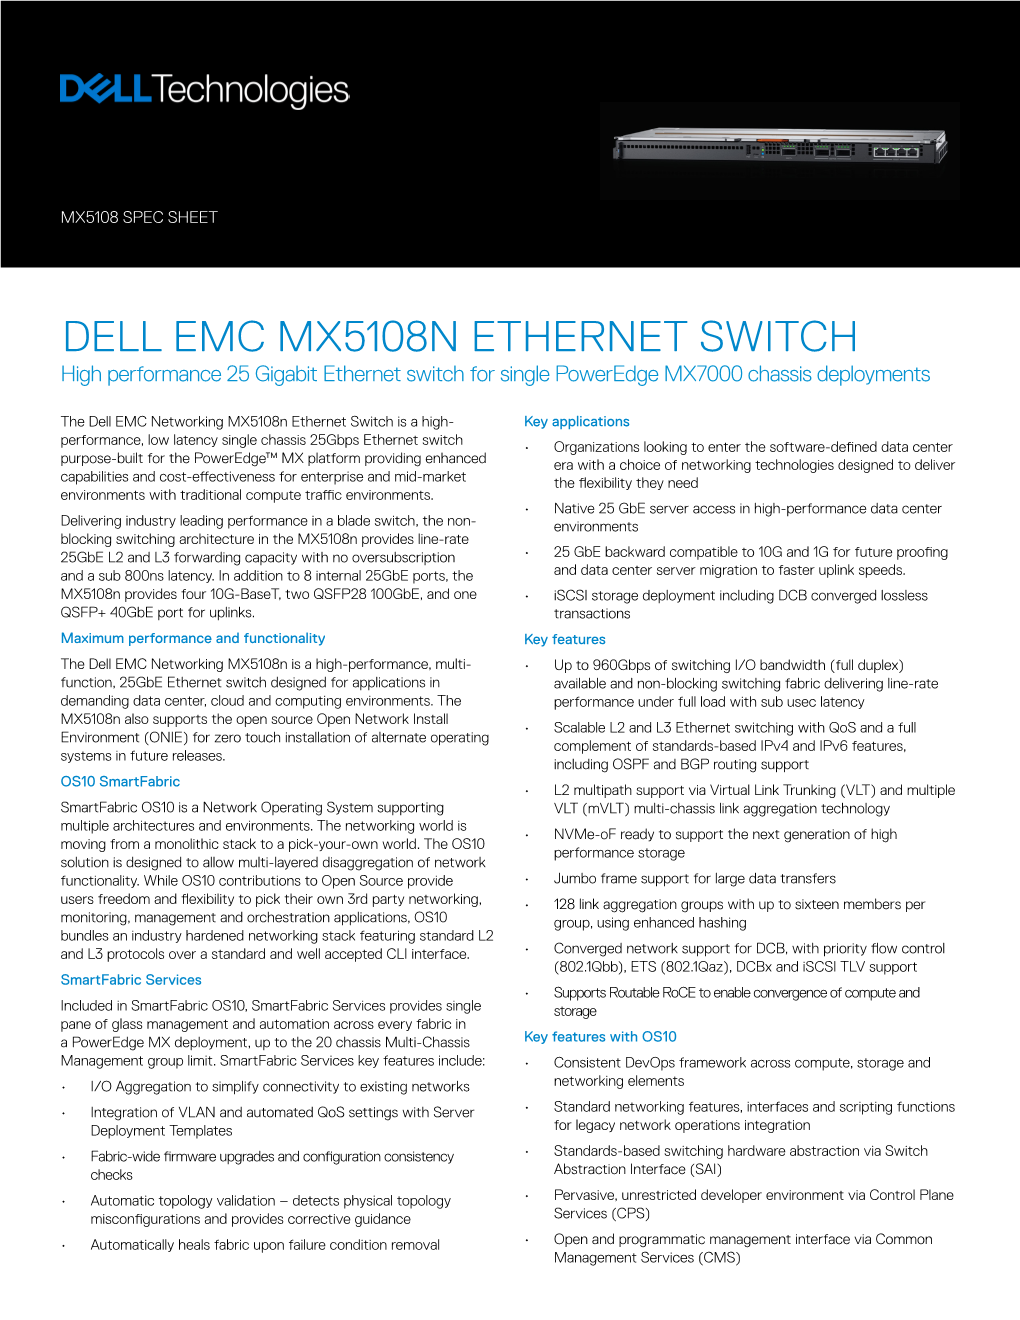 DELL EMC MX5108N ETHERNET SWITCH High Performance 25 Gigabit Ethernet Switch for Single Poweredge MX7000 Chassis Deployments